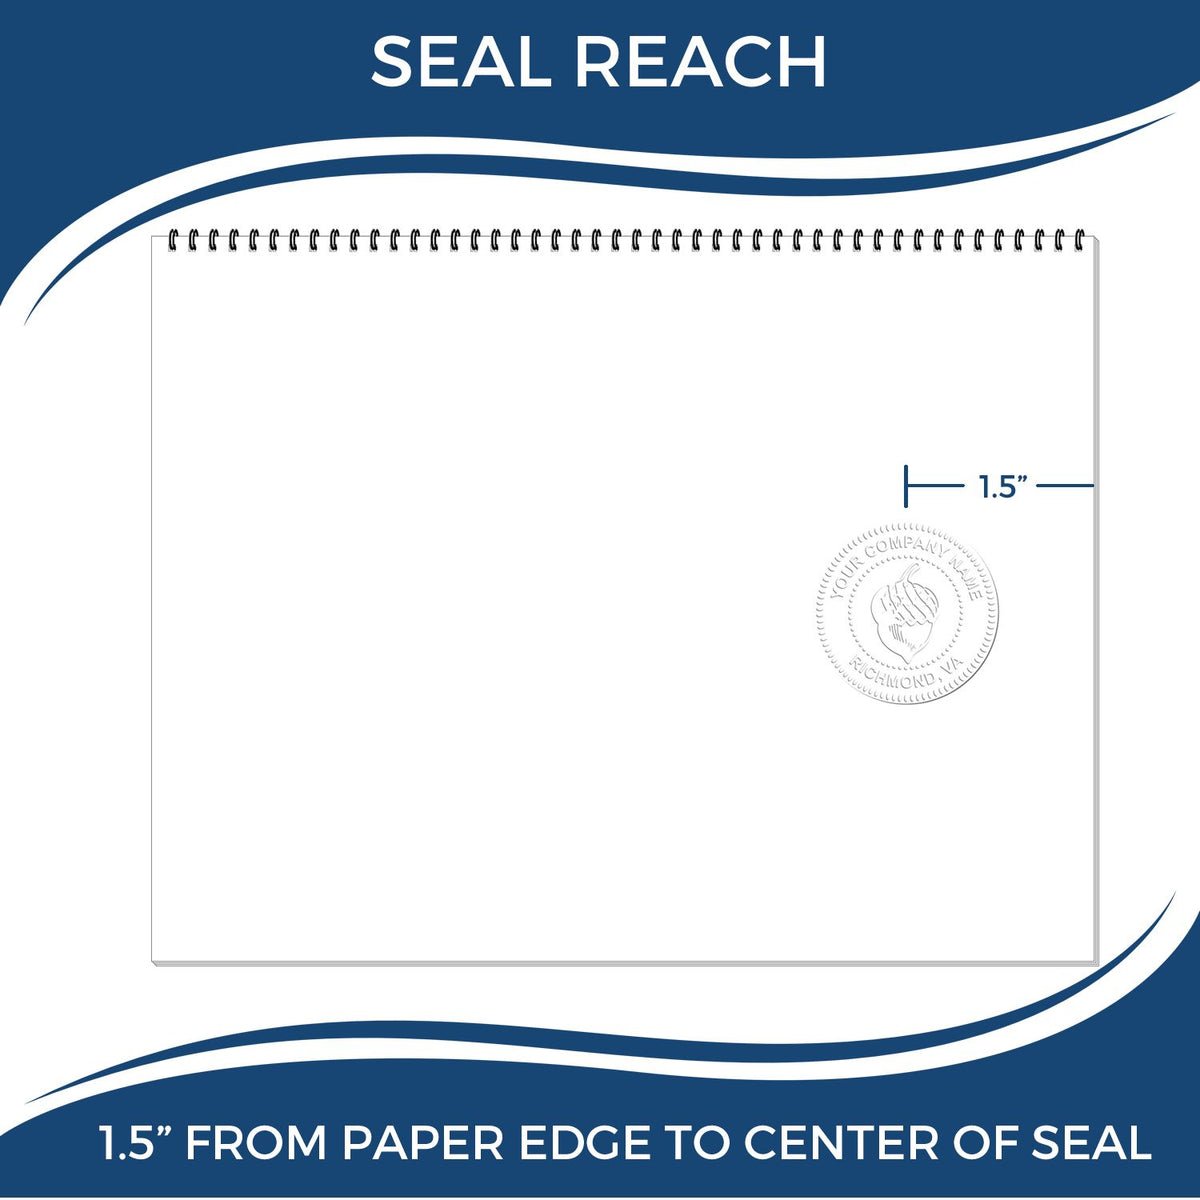 An infographic showing the seal reach which is represented by a ruler and a miniature seal image of the Soft Pocket Rhode Island Landscape Architect Embosser